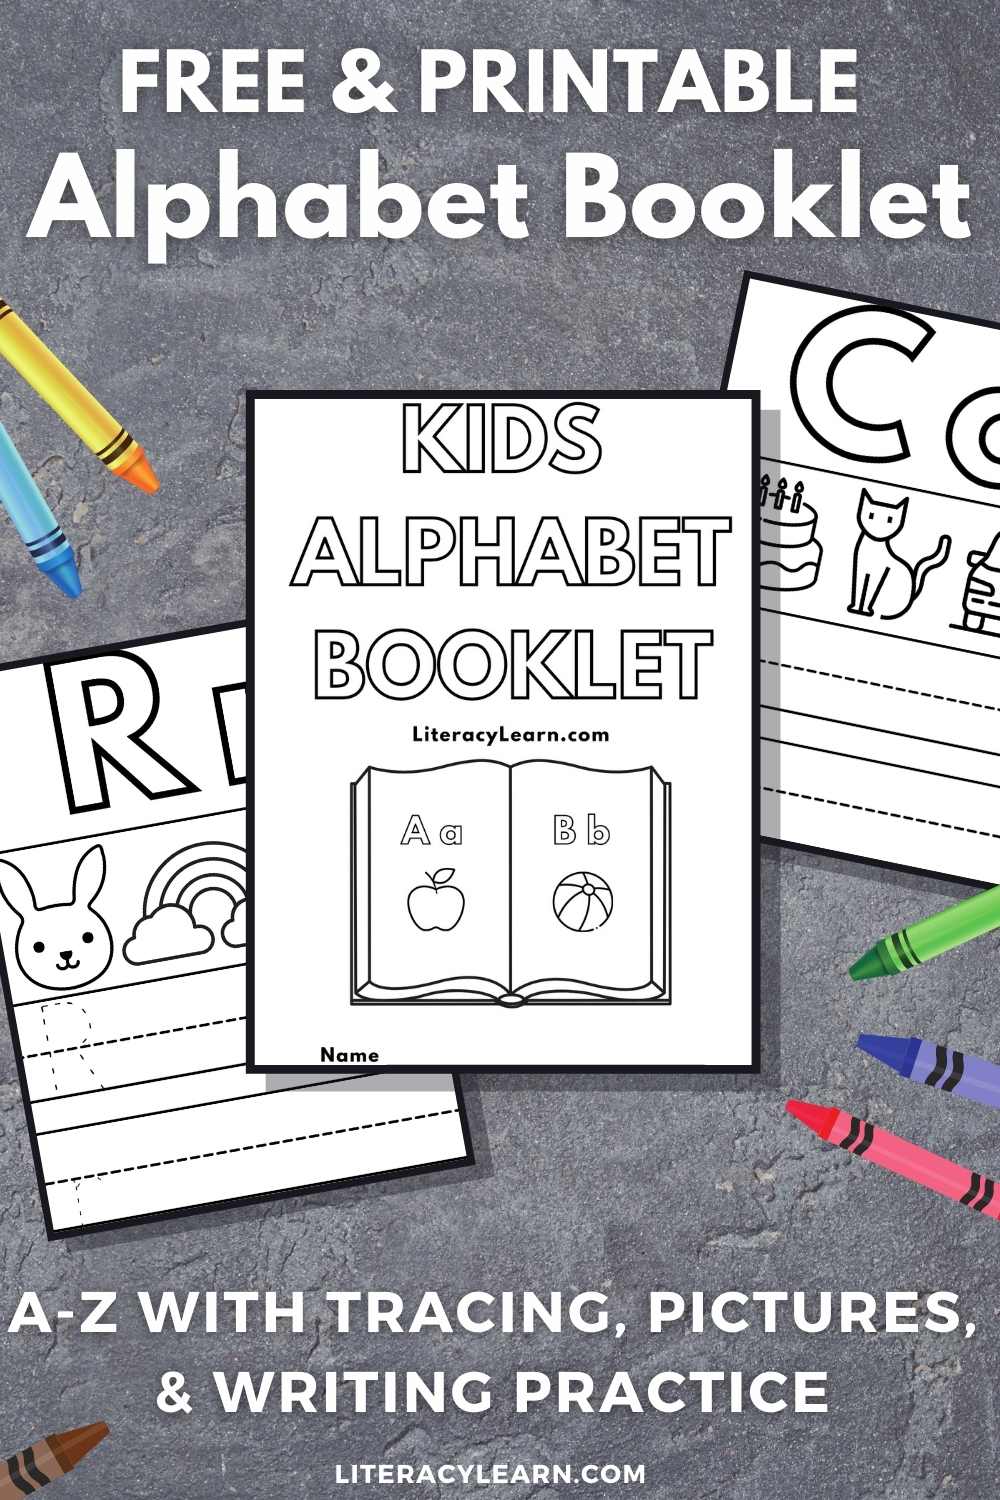 Trace the Alphabet PDF - Reading adventures for kids ages 3 to 5